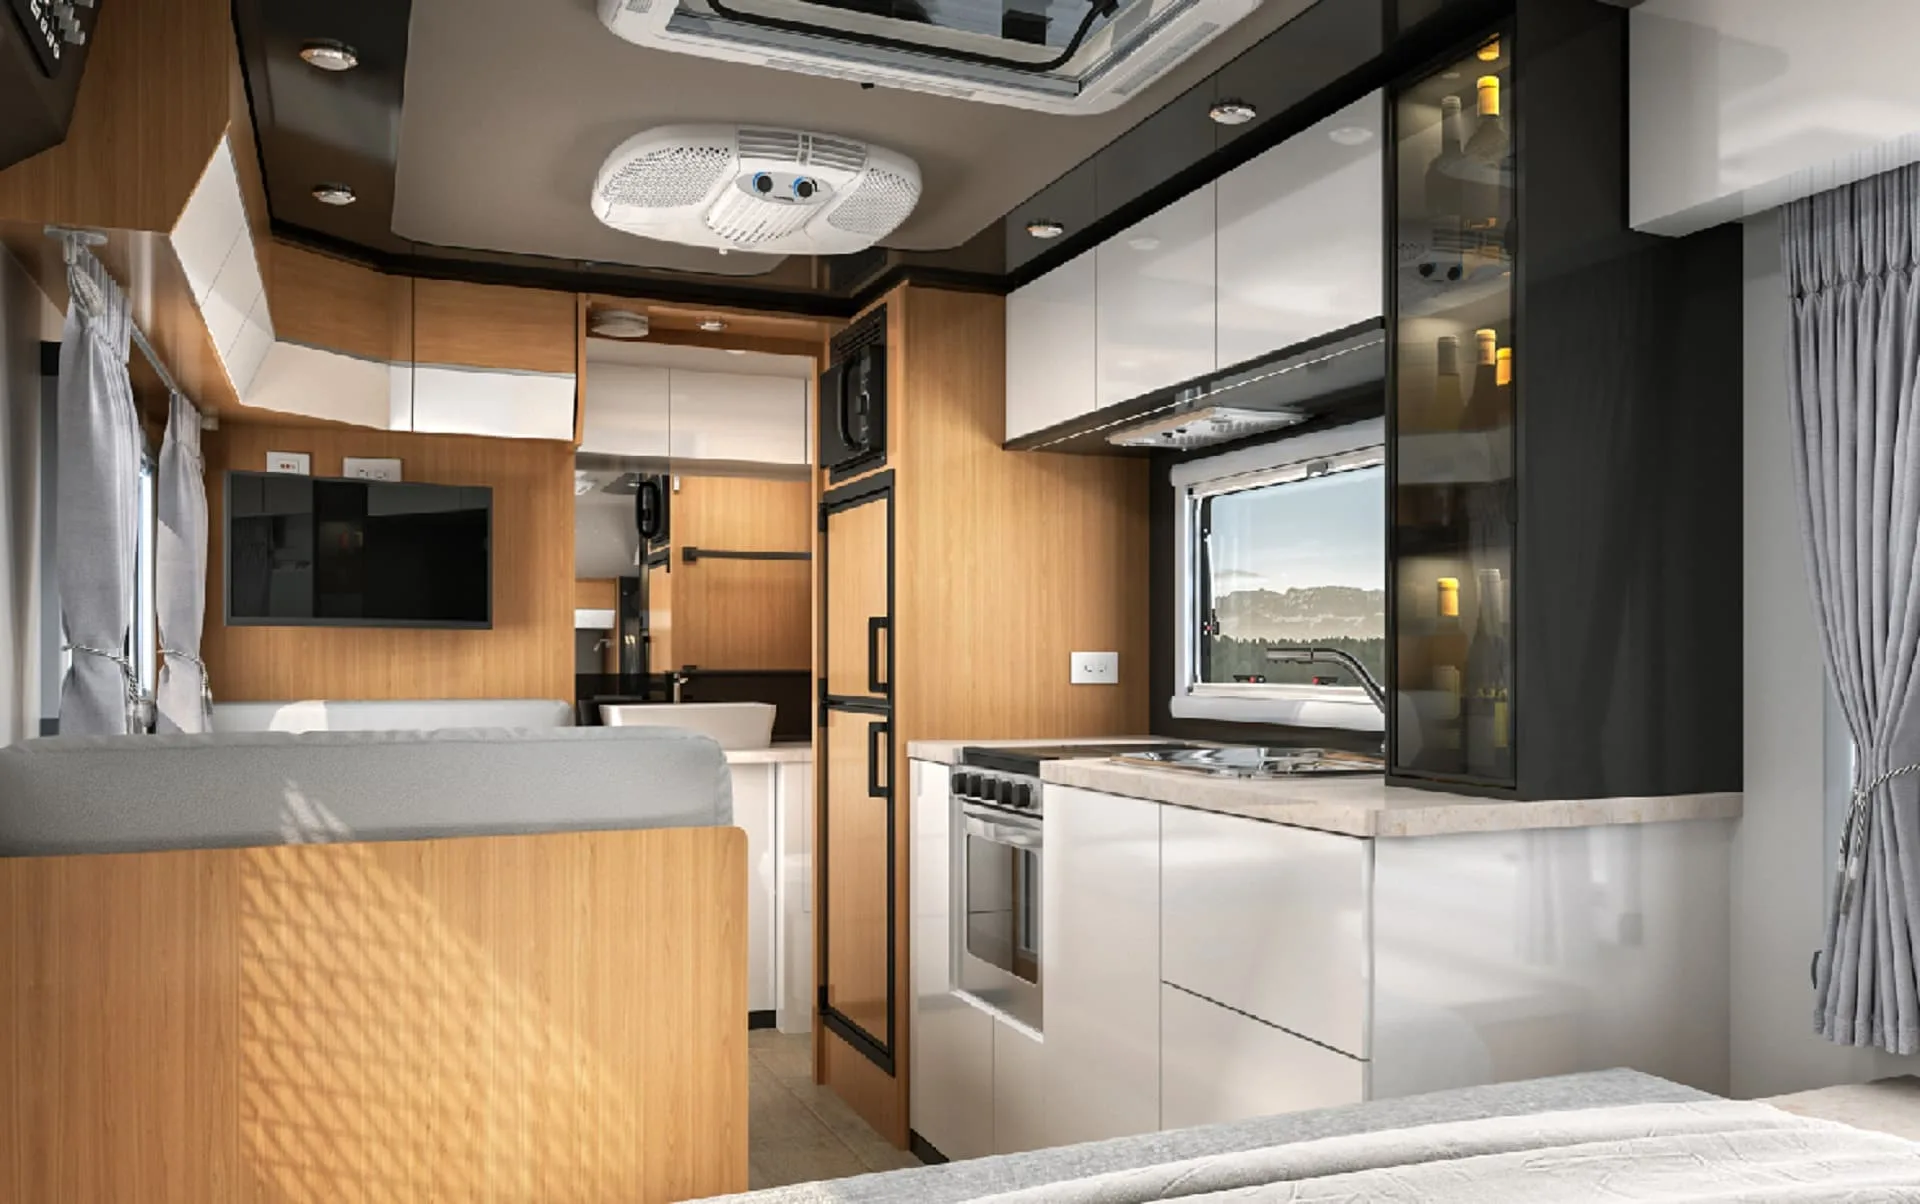 Photo of the interior (kitchen area) of a Black Series camper